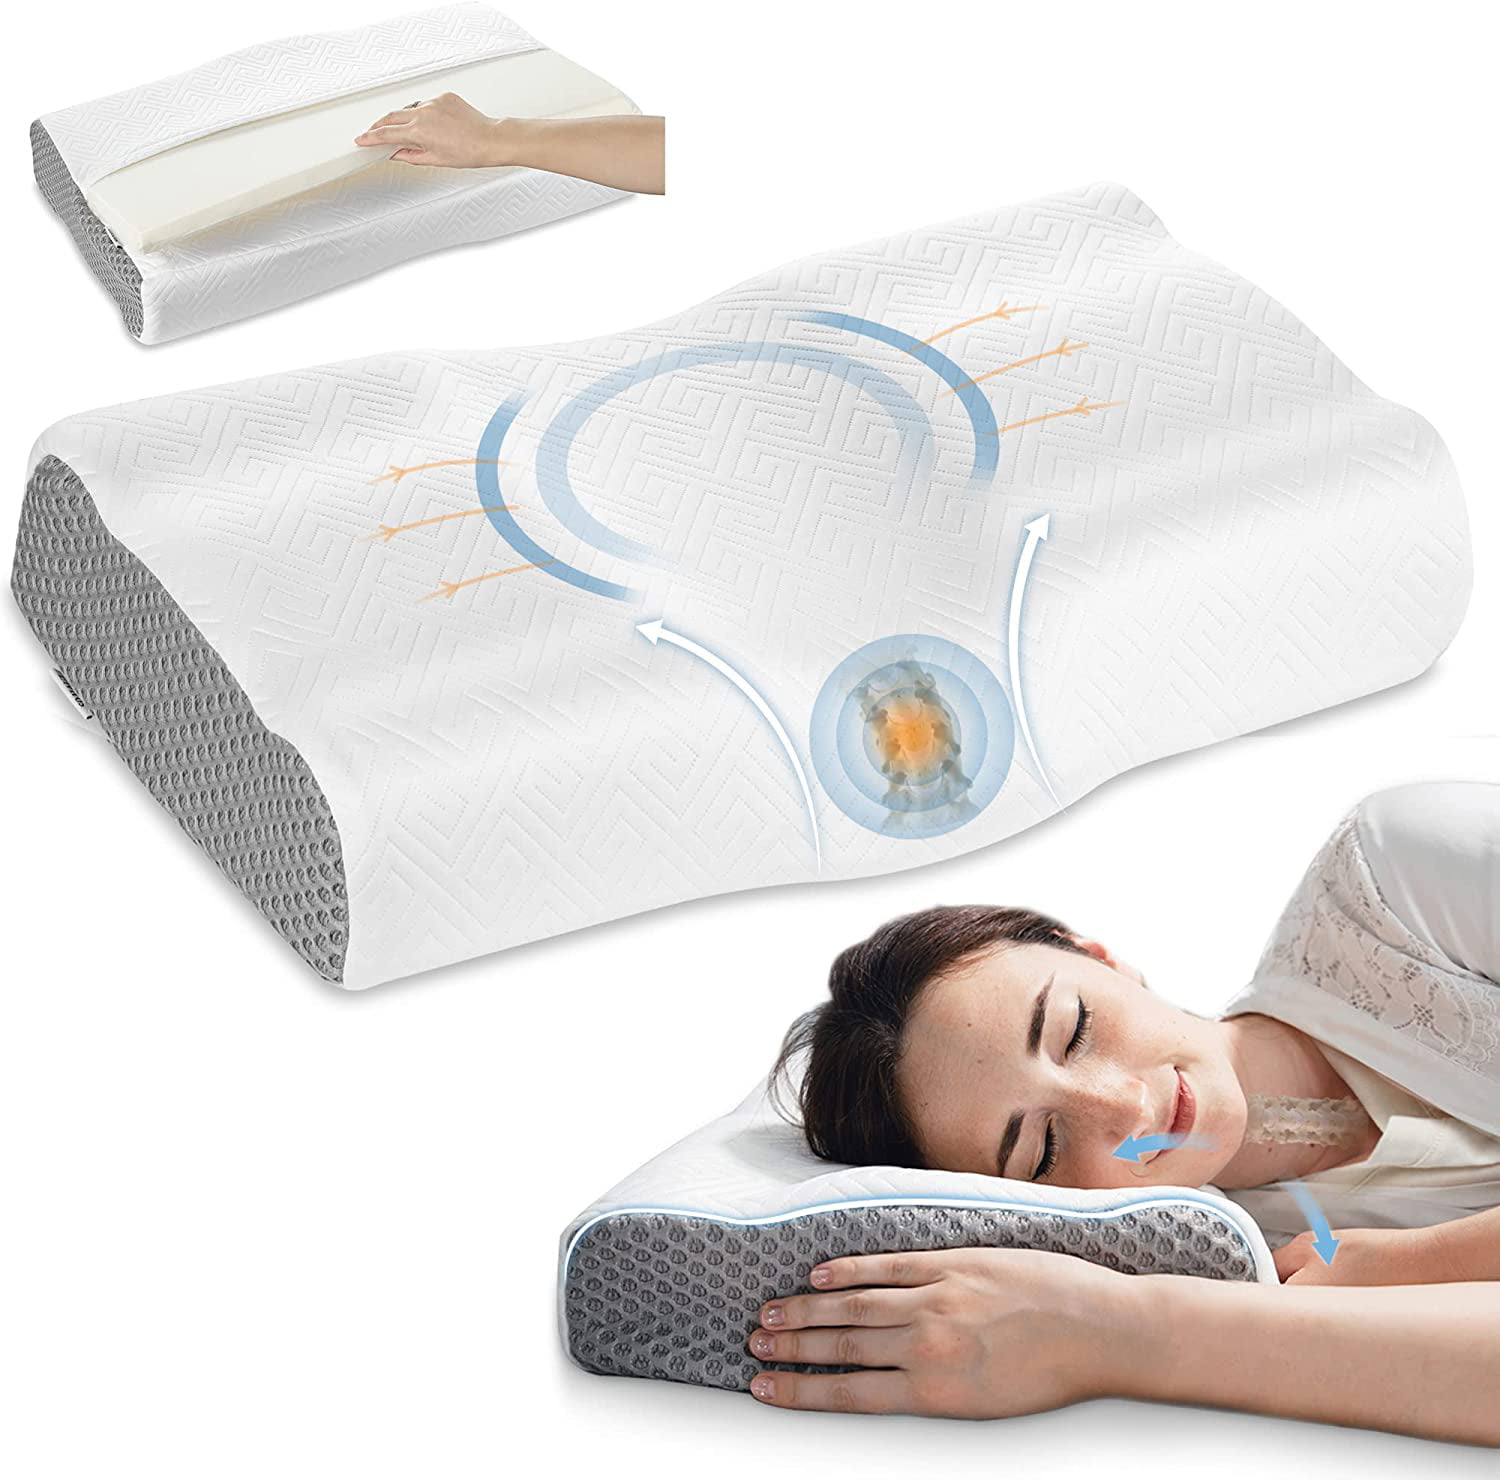 Memory Foam Breathe Sleep Pillow Contour Cervical Orthopedic Neck Bed Support US 